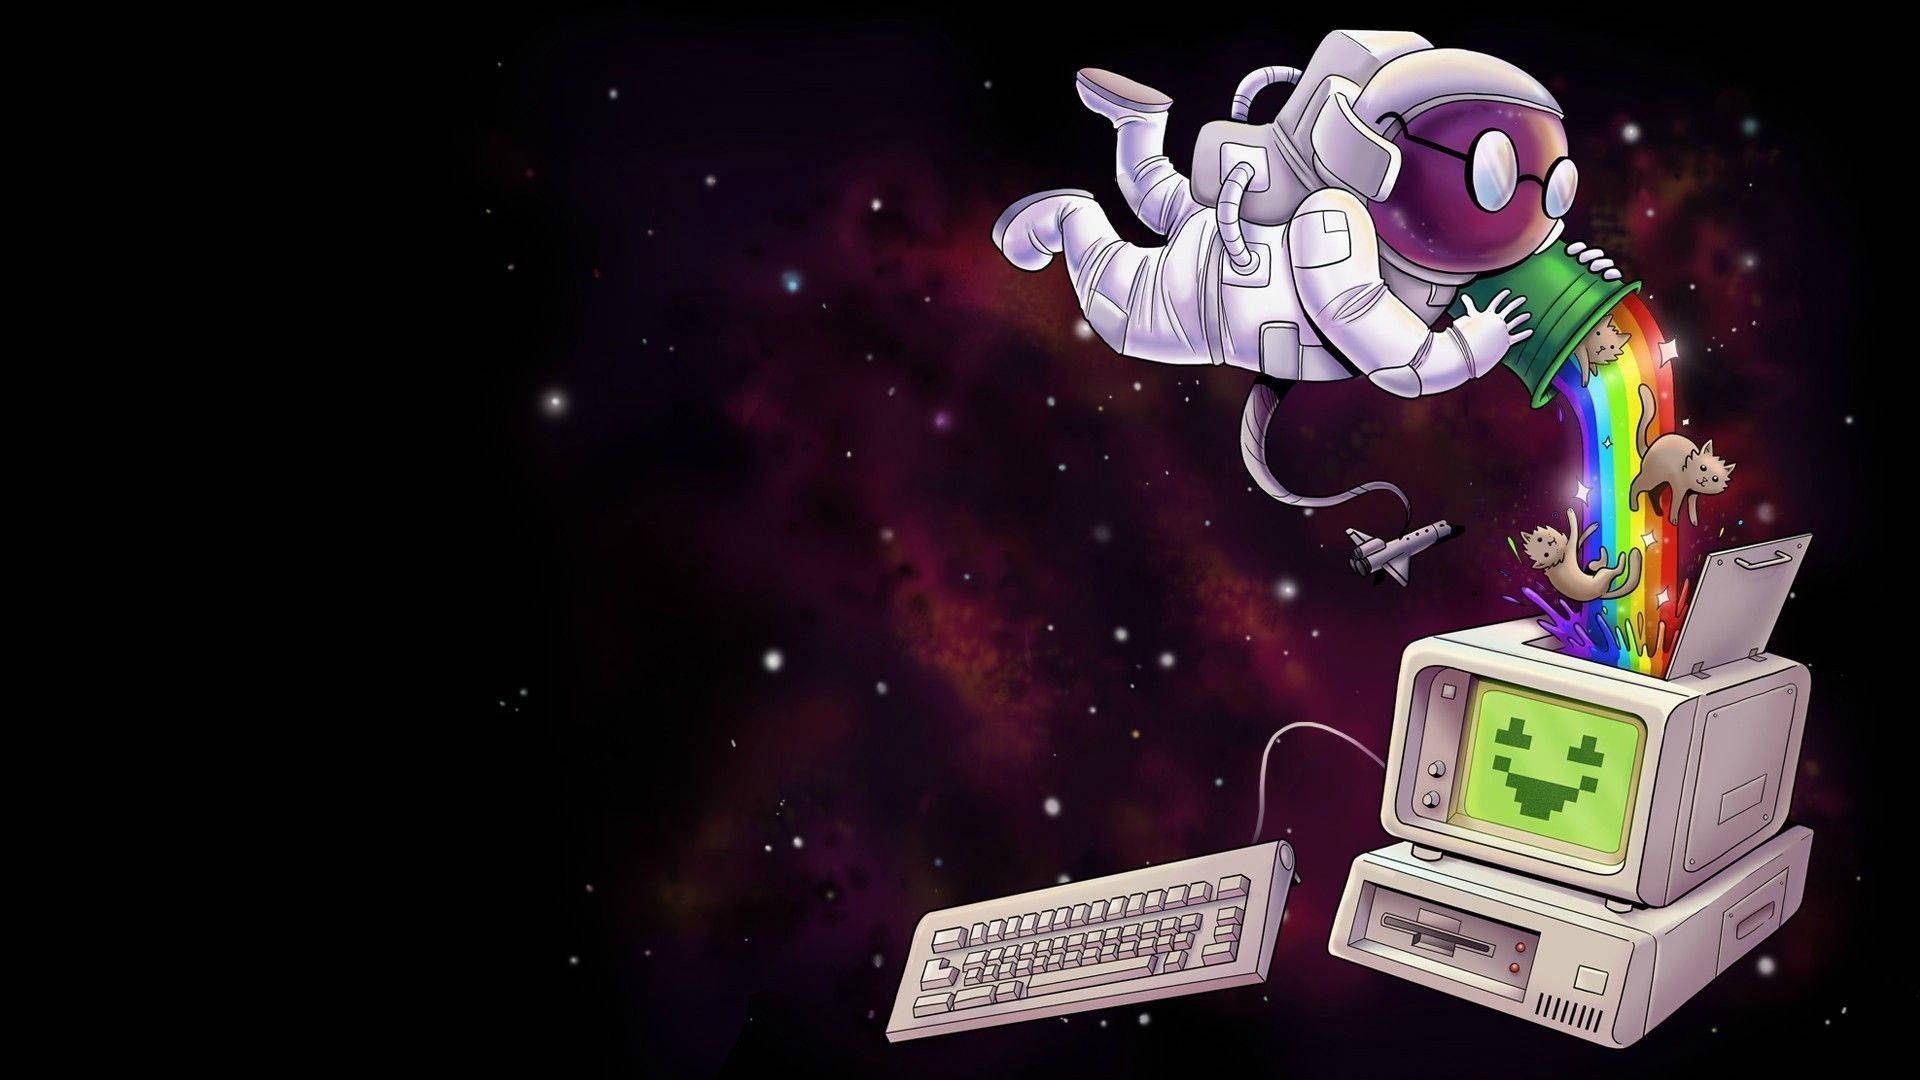 Astronaut Aesthetic With Computer Wallpaper